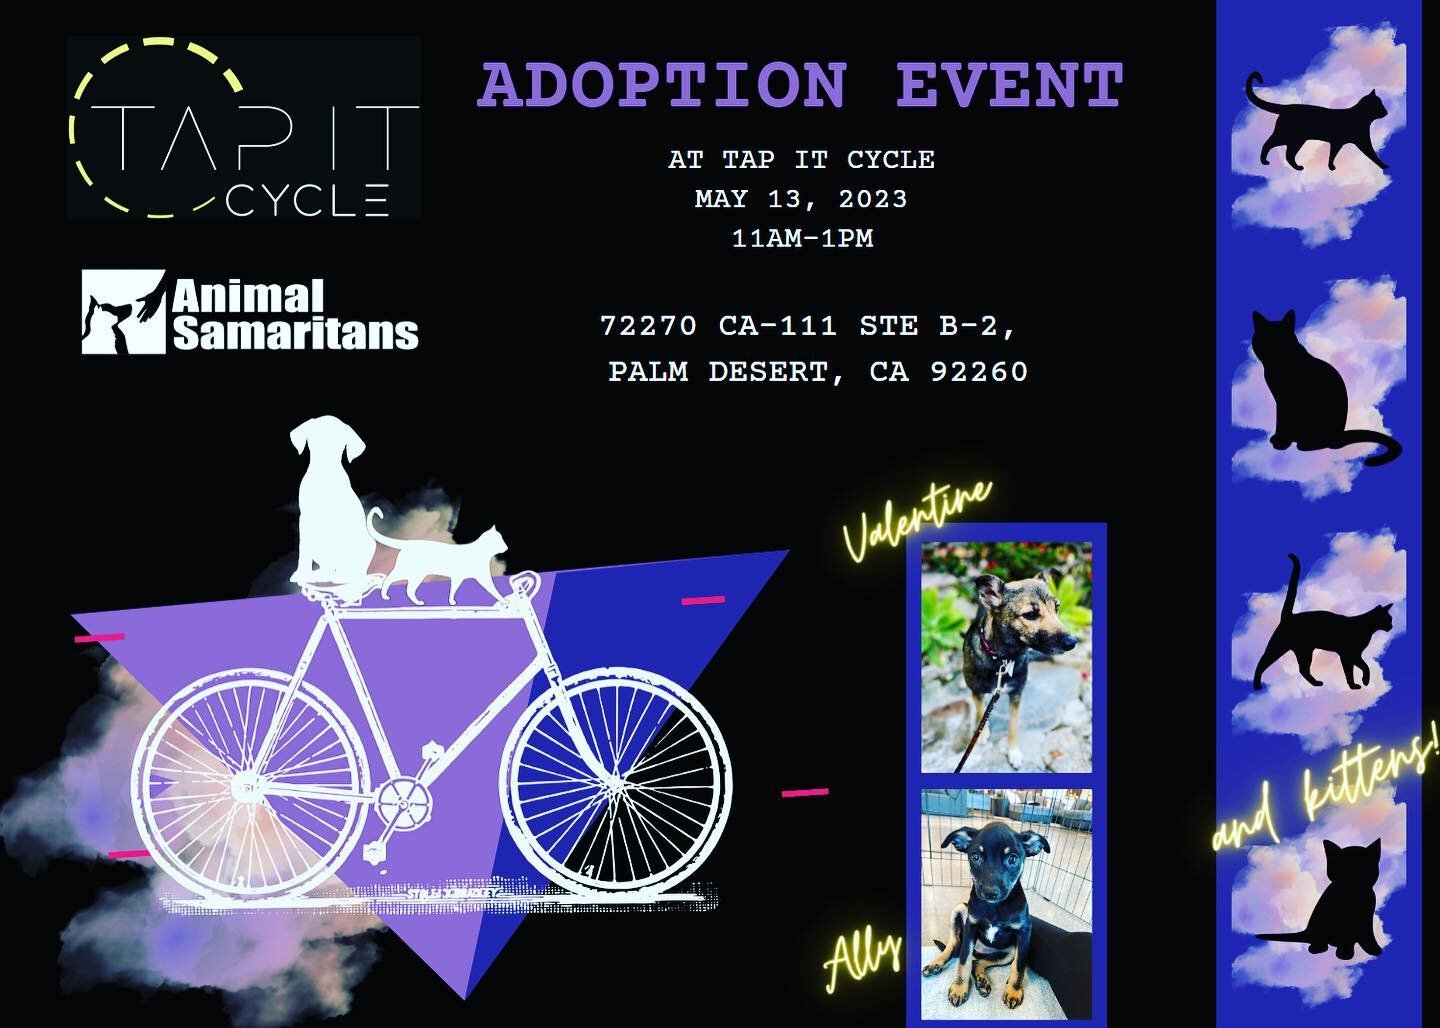 Join us Saturday May 13th &amp; @animalsamaritans for our first PET ADOPTION DAY! This is held at the studio inside (strength room) from 11-1pm. Come visit these beautiful fur babies that need a loving home. For those who adopt TAP IT CYCLE will give